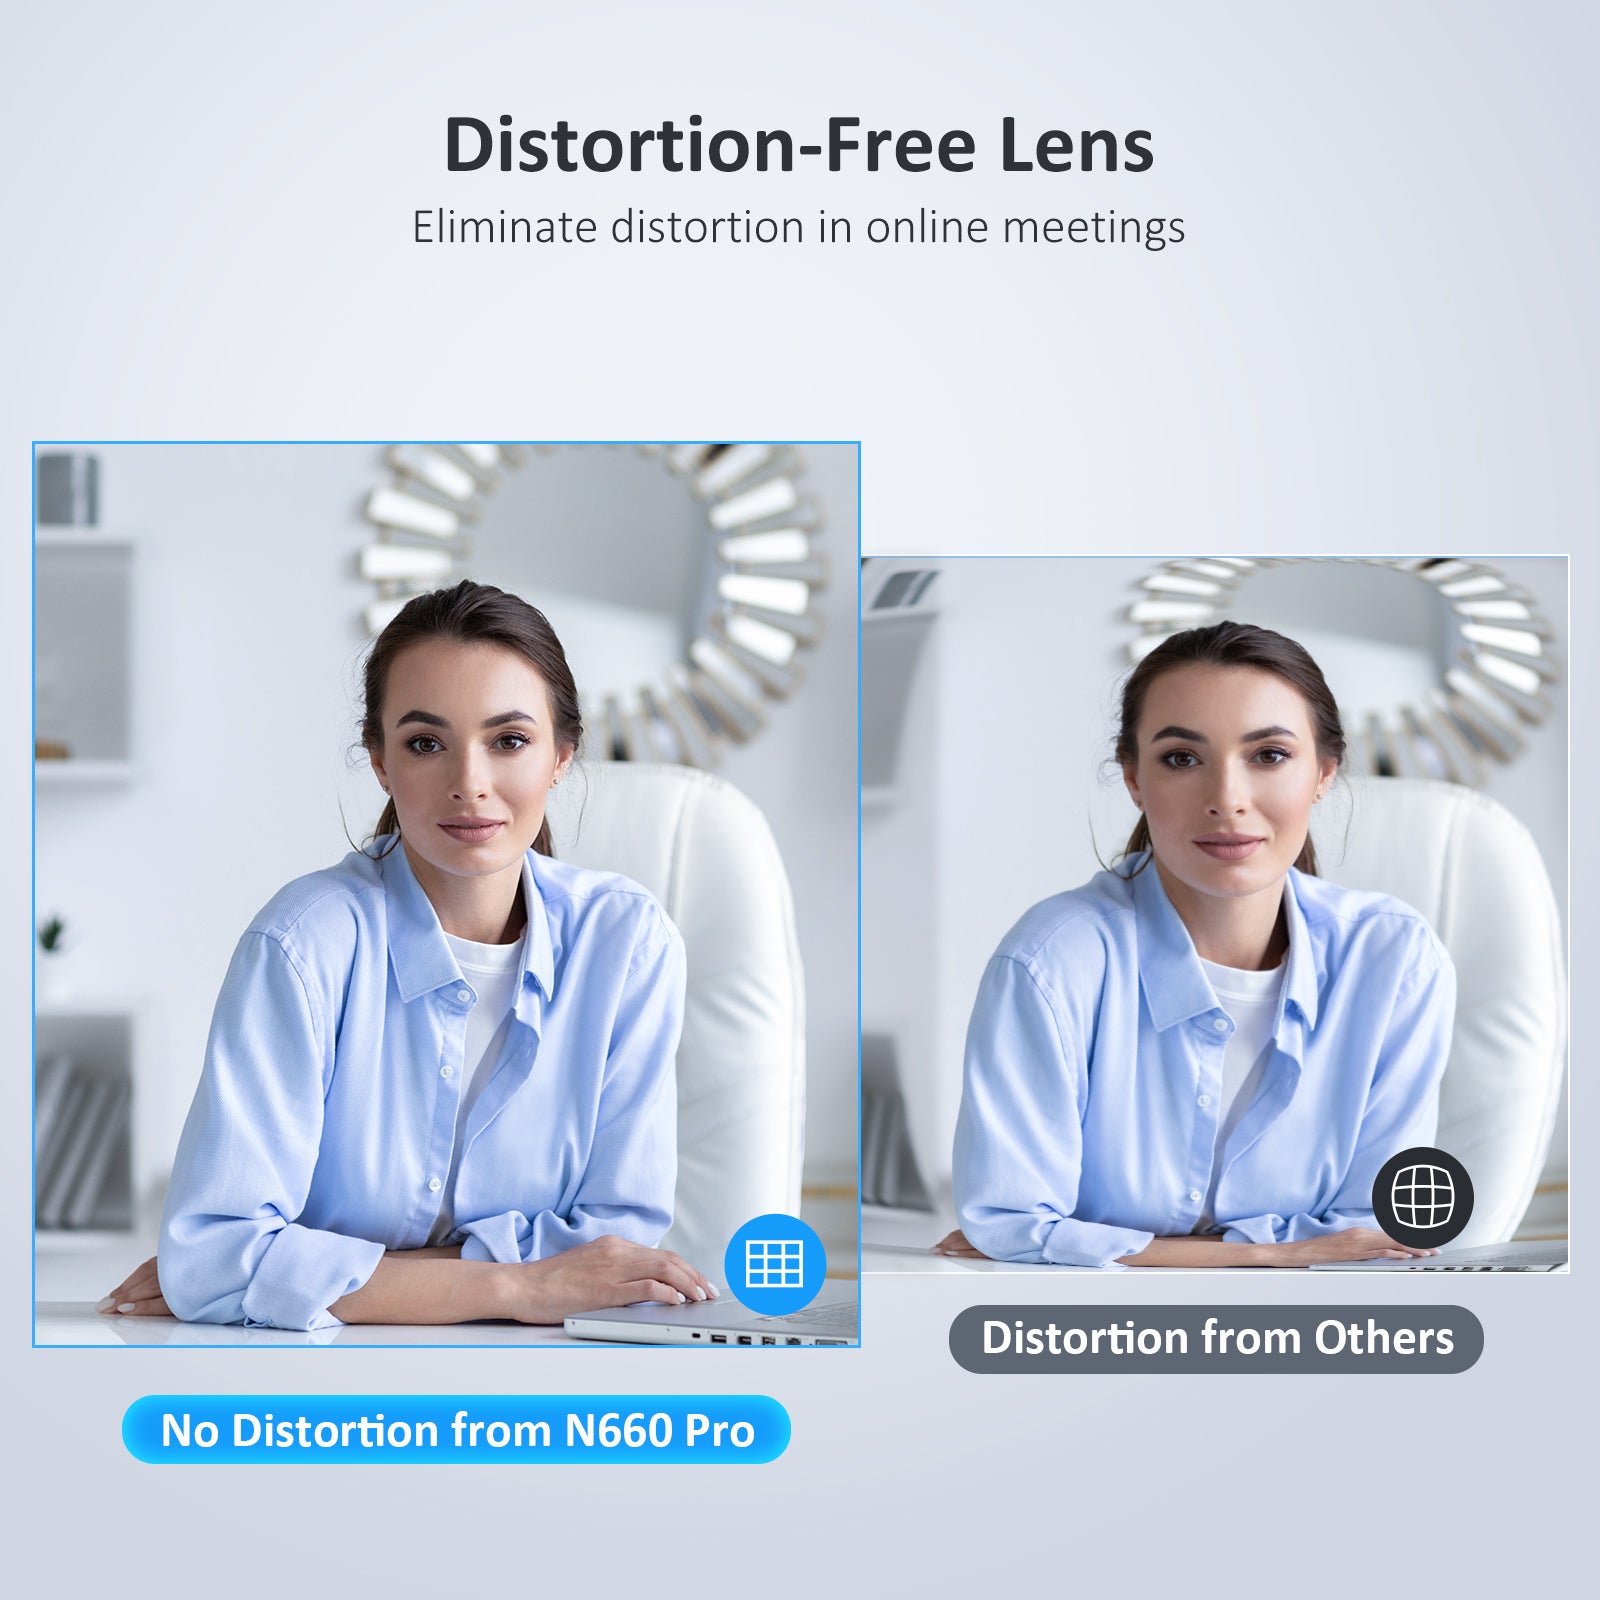 Compared to other webcam images, the N660 Pro does not suffer from lens distortion.